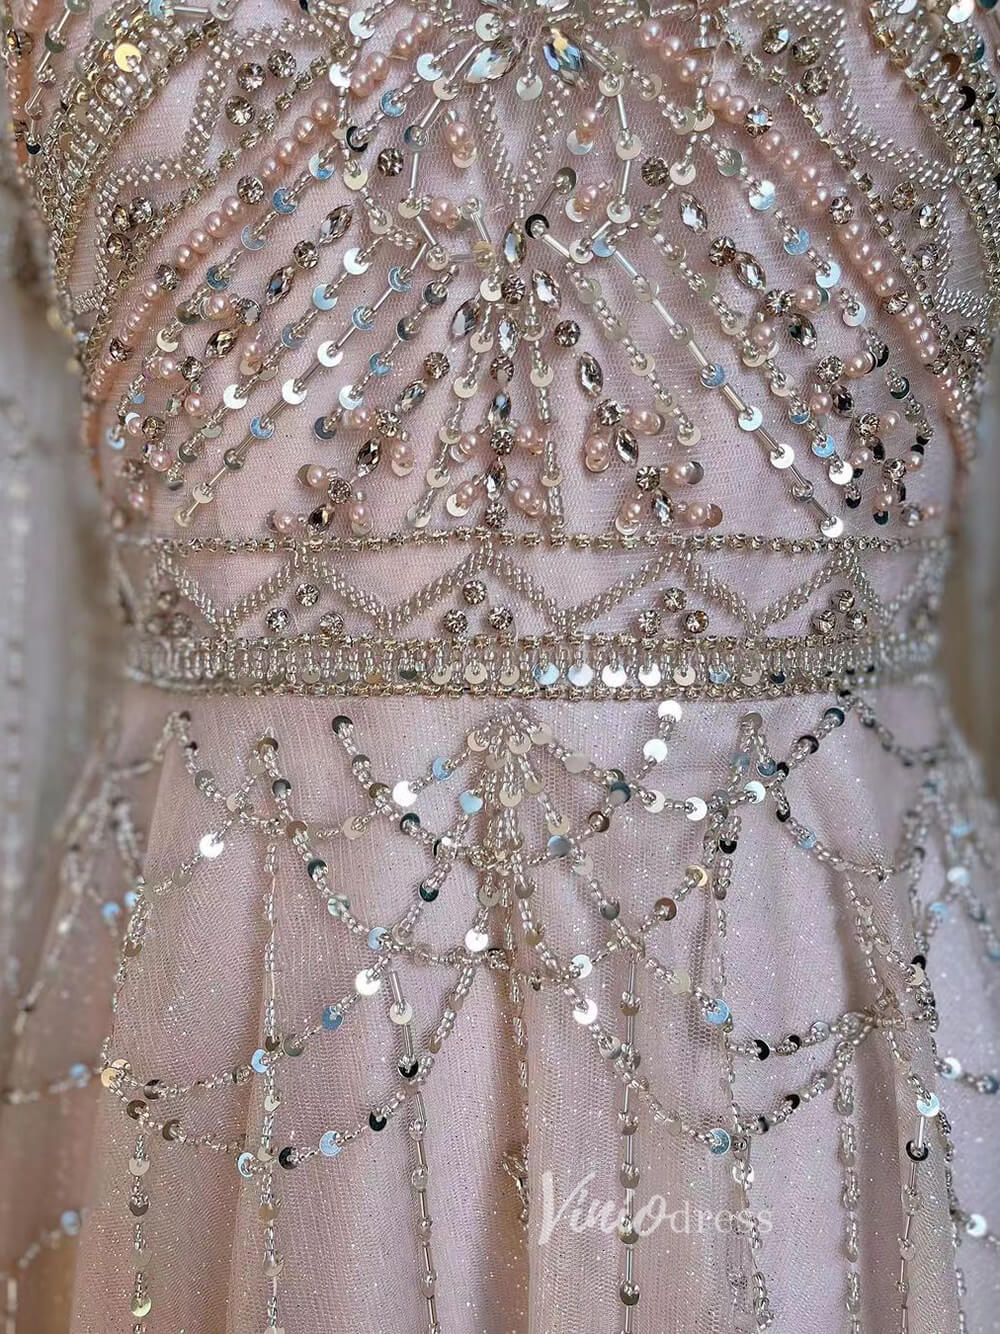 Pink Beaded A-line Prom Dresses Extra Long Sleeve Evening Dress 20068-prom dresses-Viniodress-Viniodress